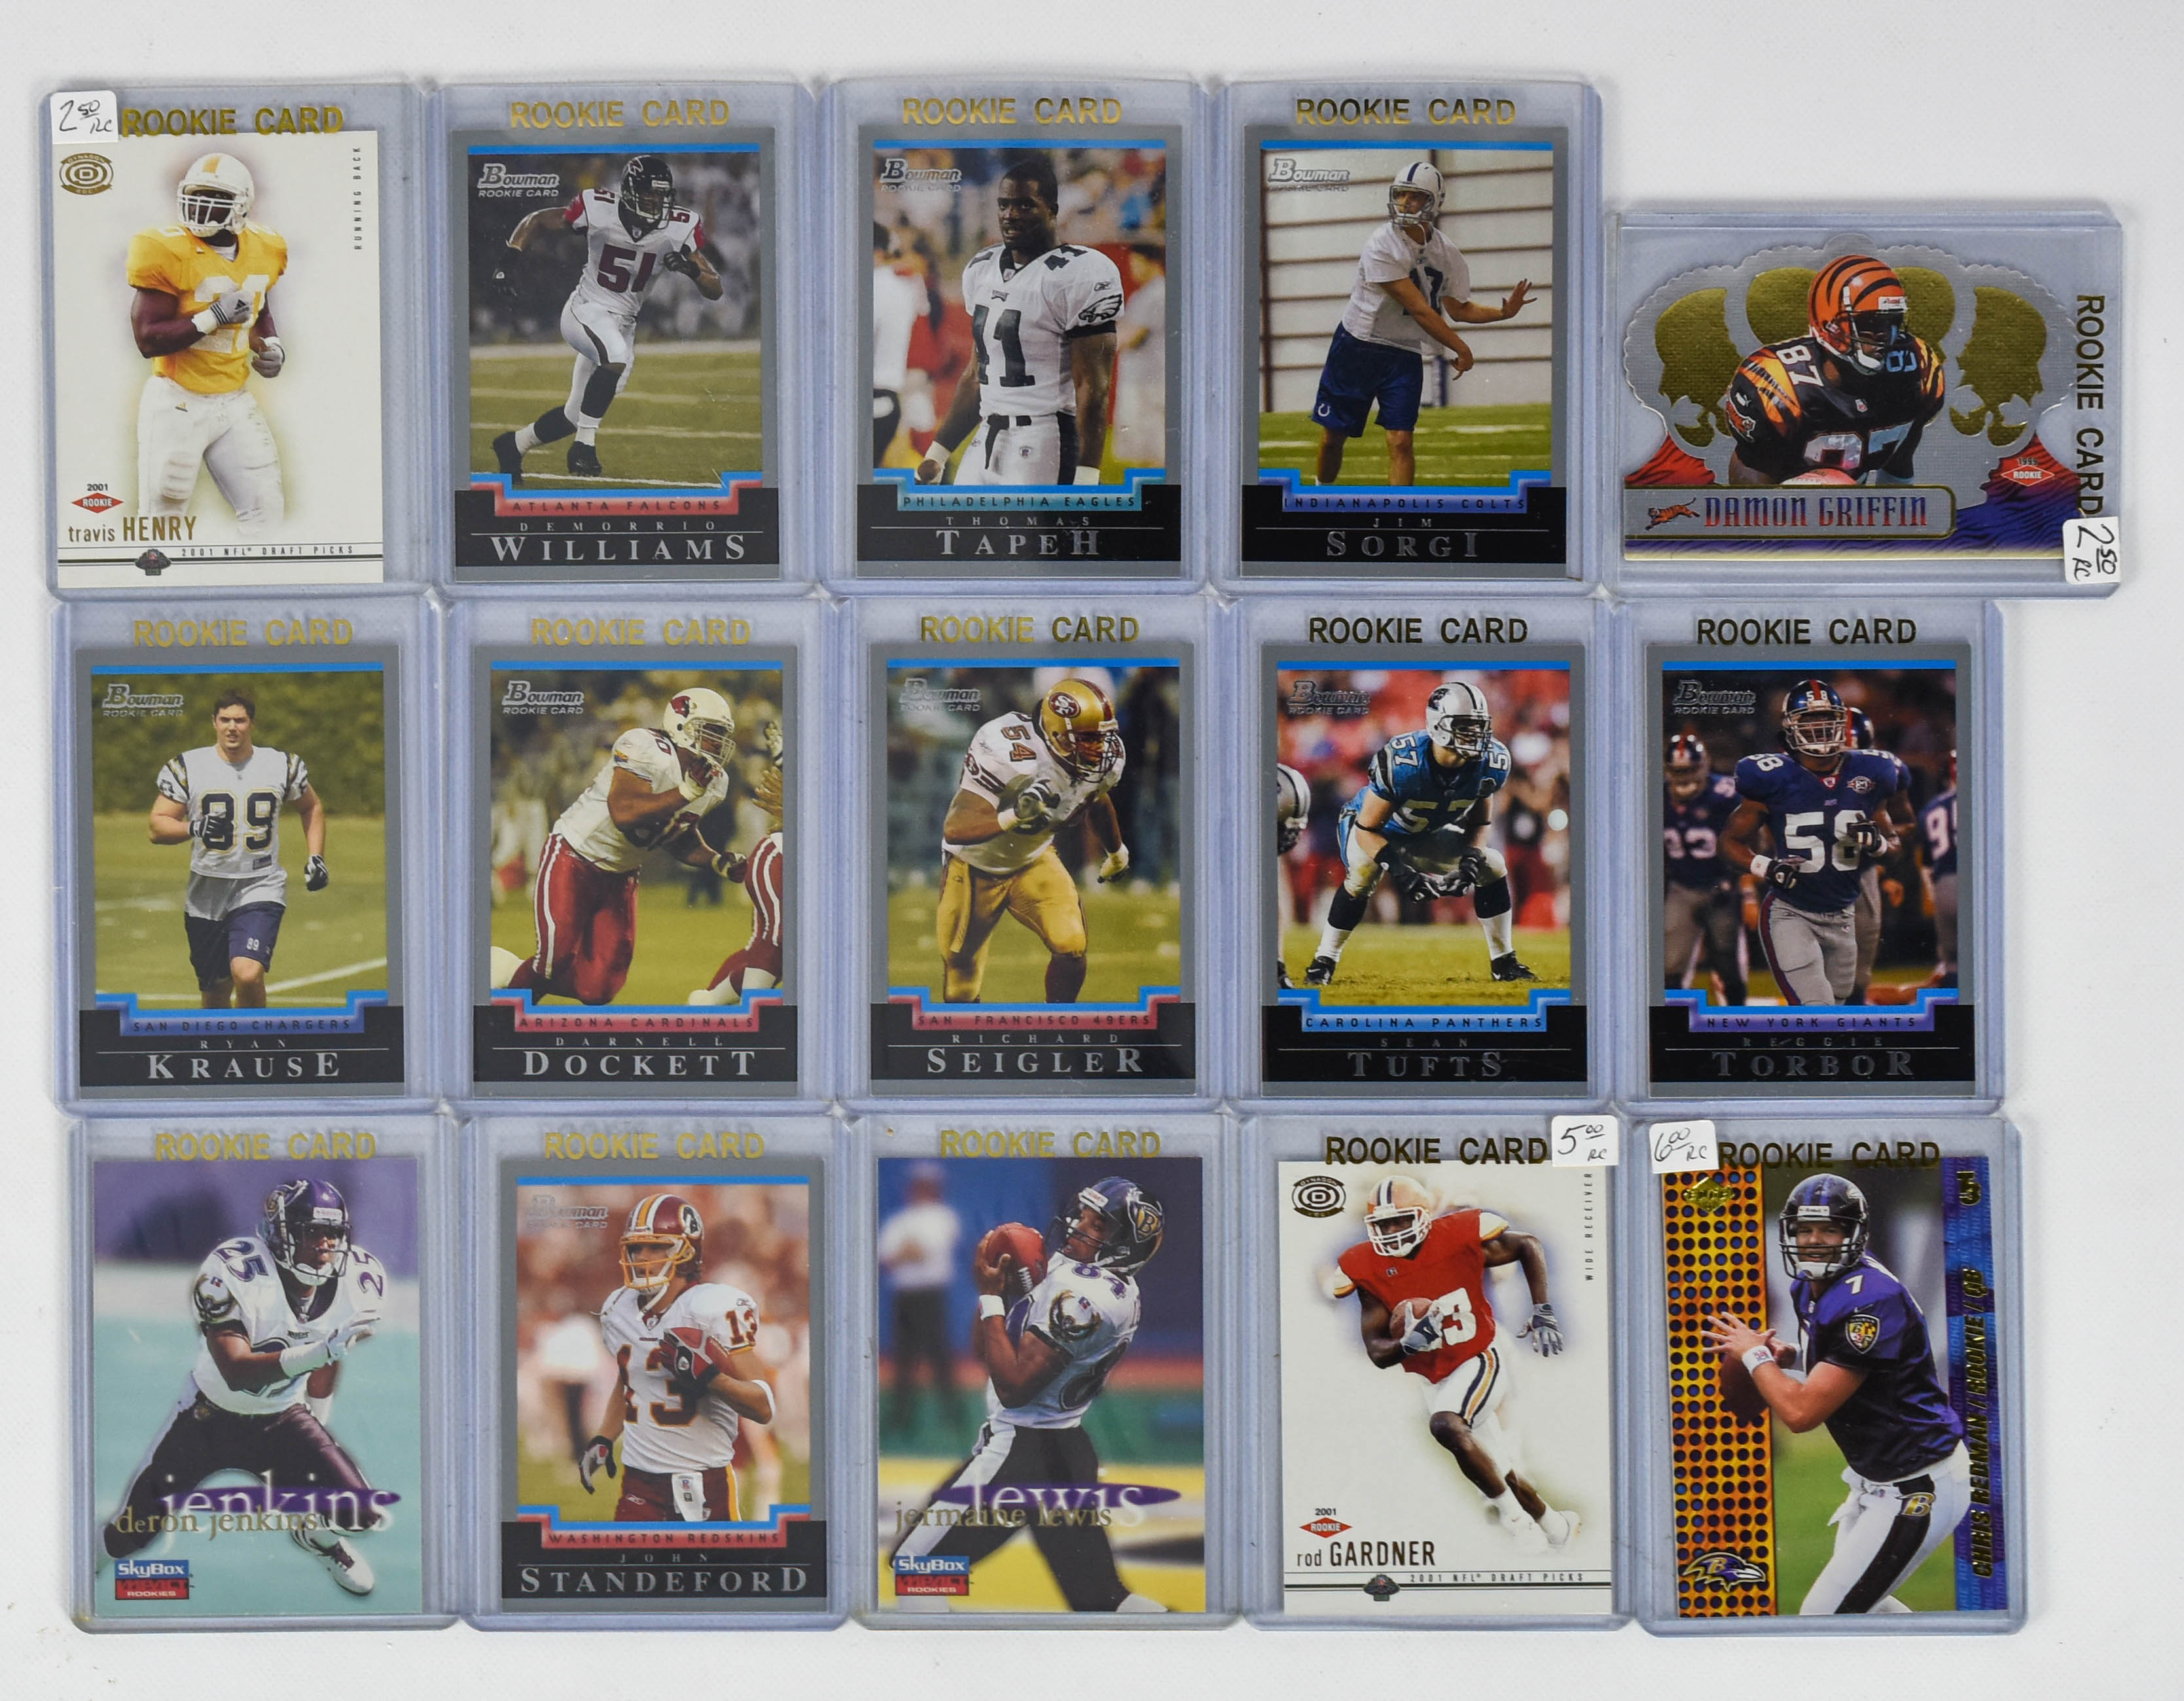 15 Early 2000s Era NFL Rookie Football Cards Plus Extra Card Lot